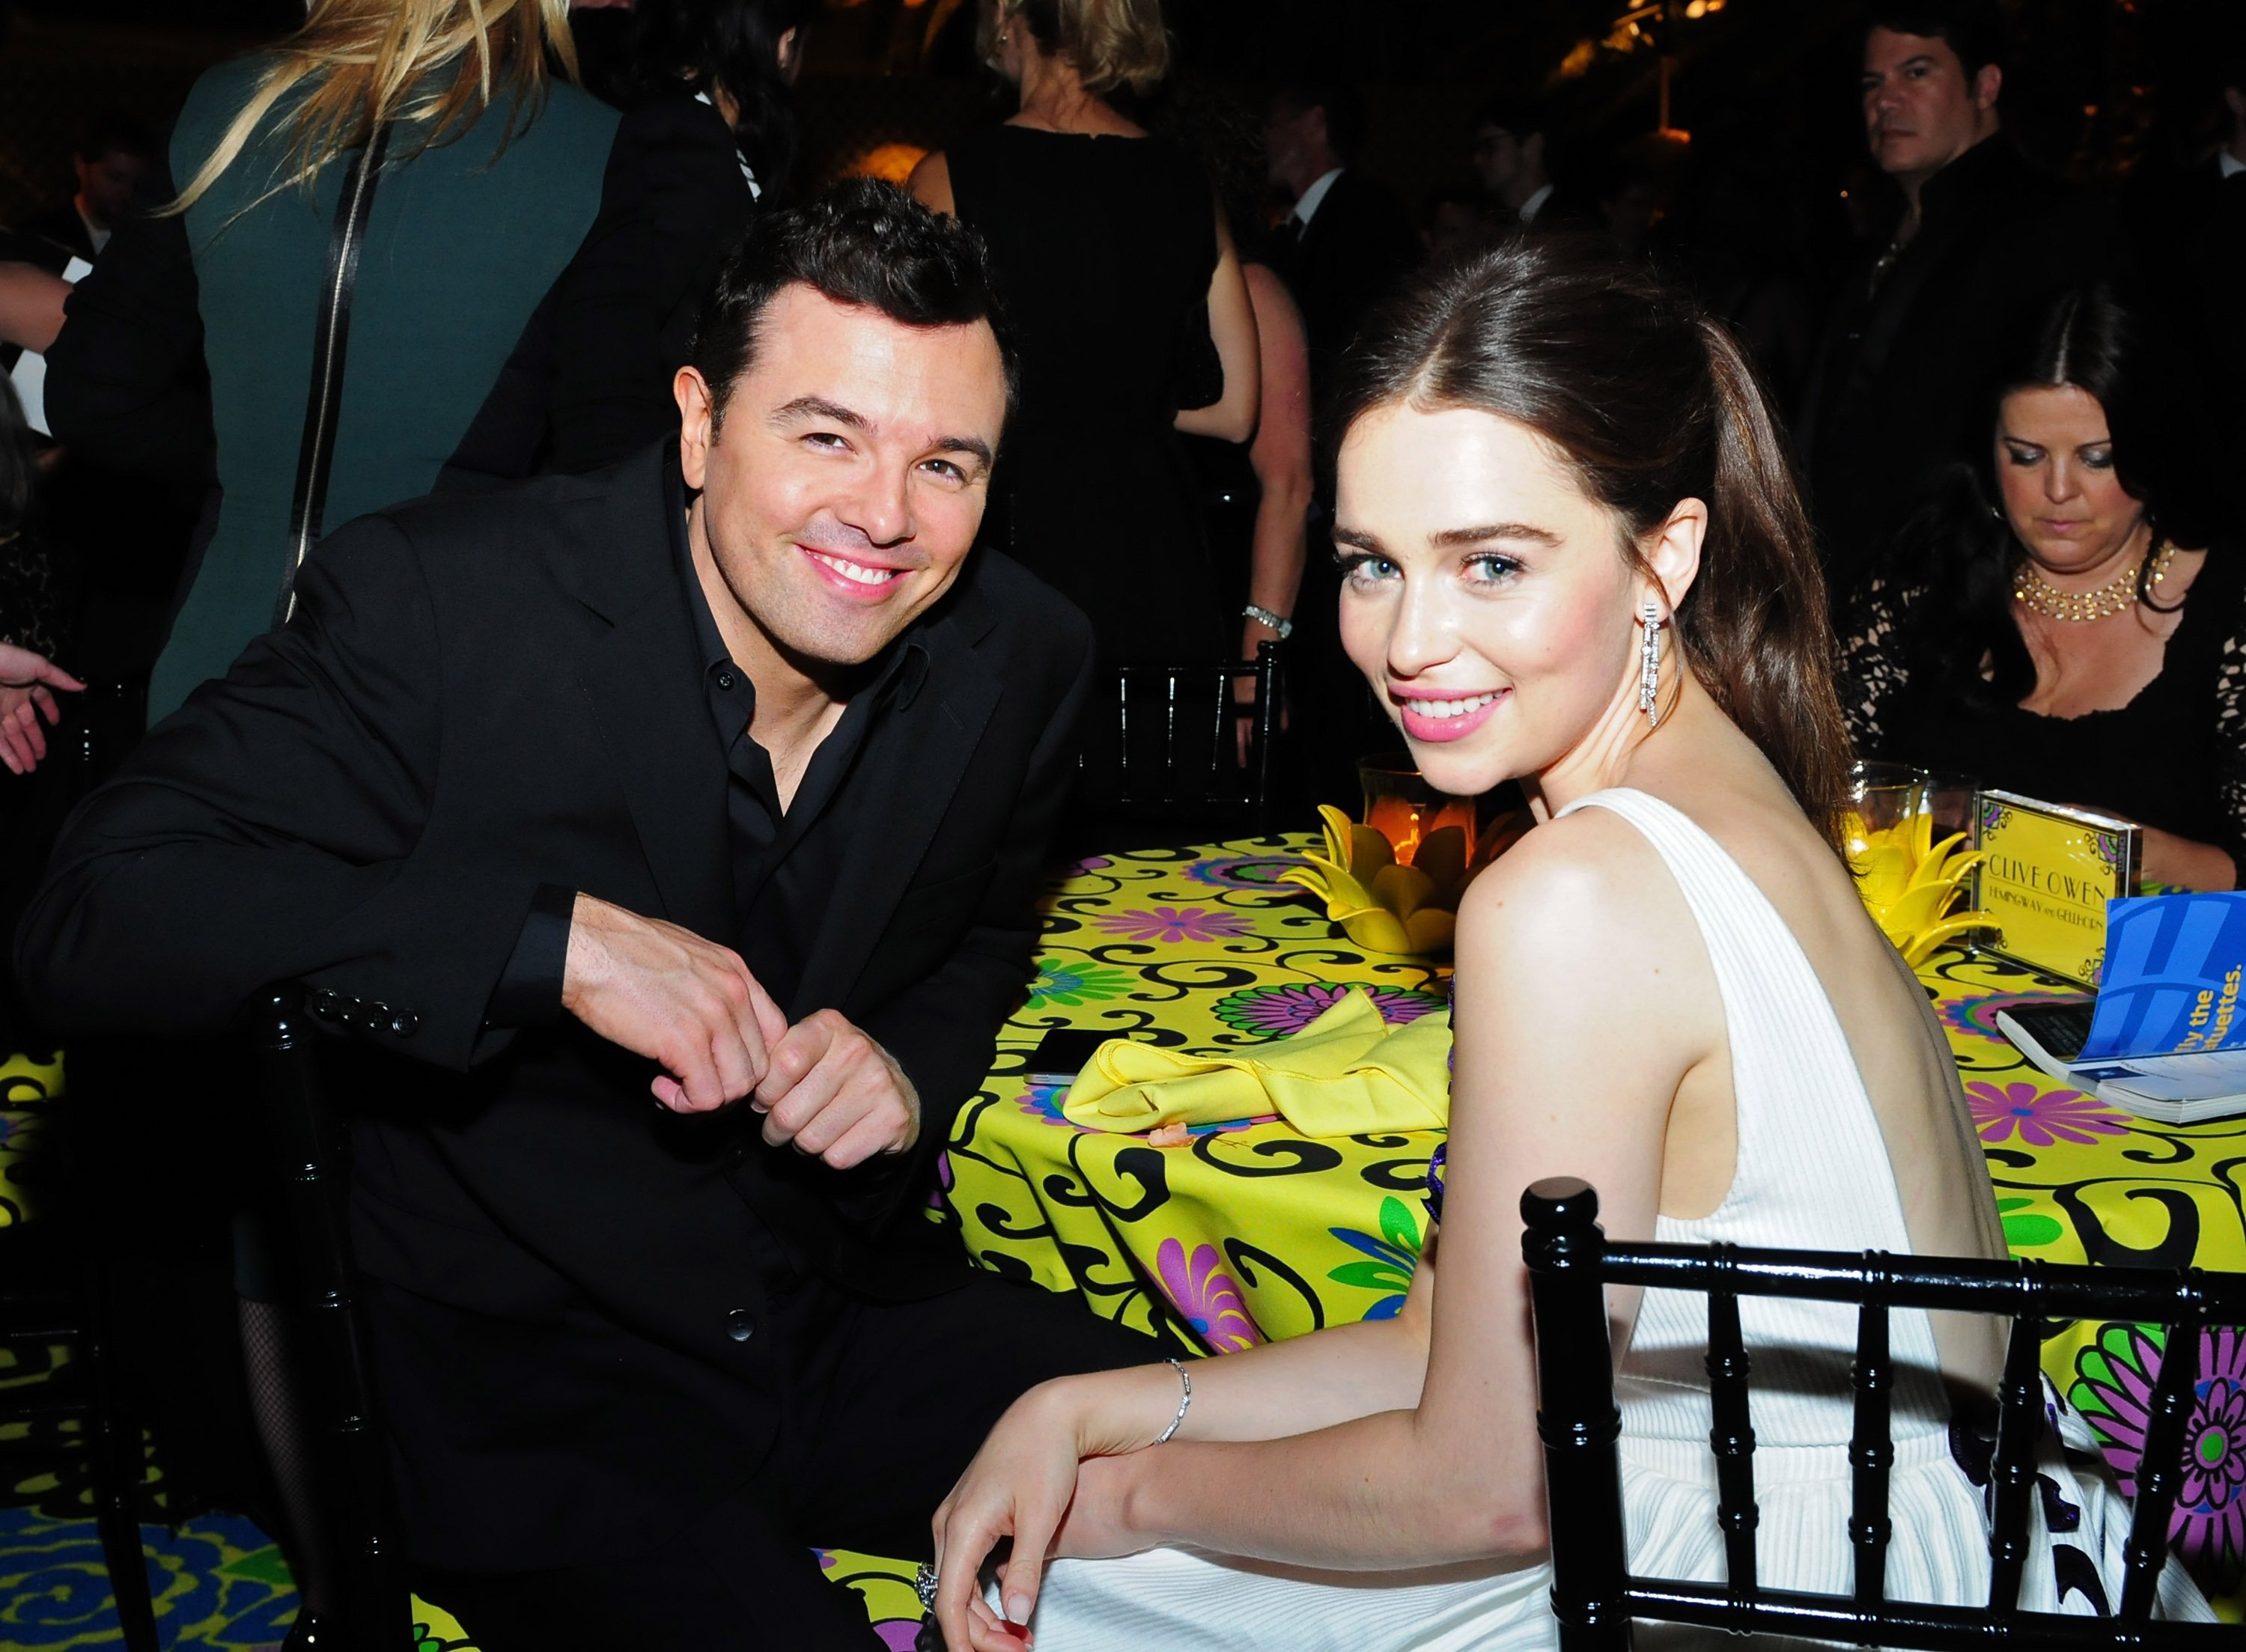 Seth MacFarlane and actress Emilia Clarke attend HBO's Official Emmy After Party at The Plaza at the Pacific Design Center on September 23, 2012, in Los Angeles, California. | Source: Getty Images